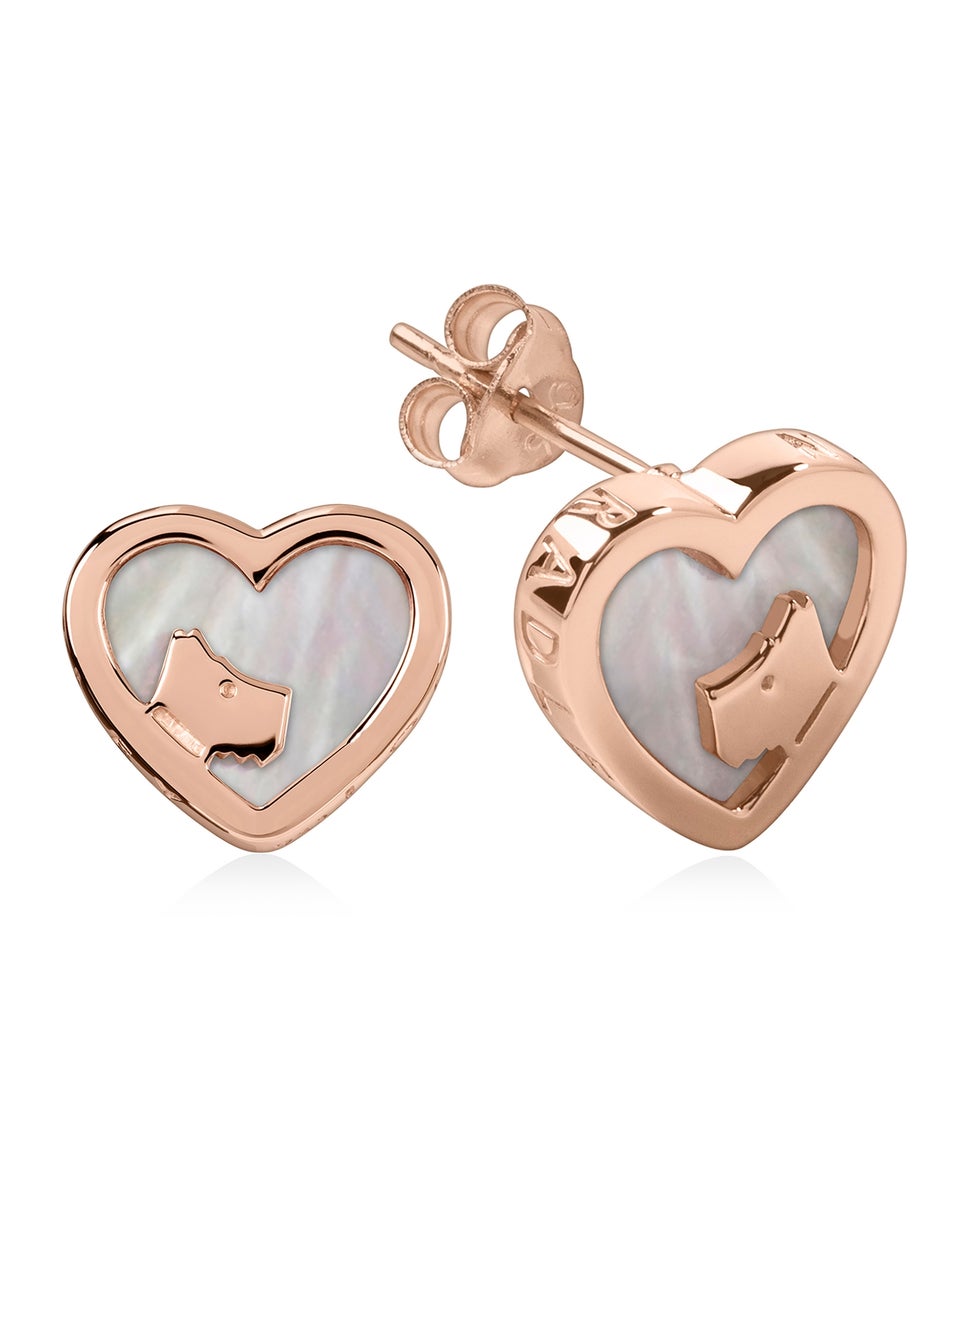 Radley London Silver Sterling Mother of Pearl Heart Shaped Studs